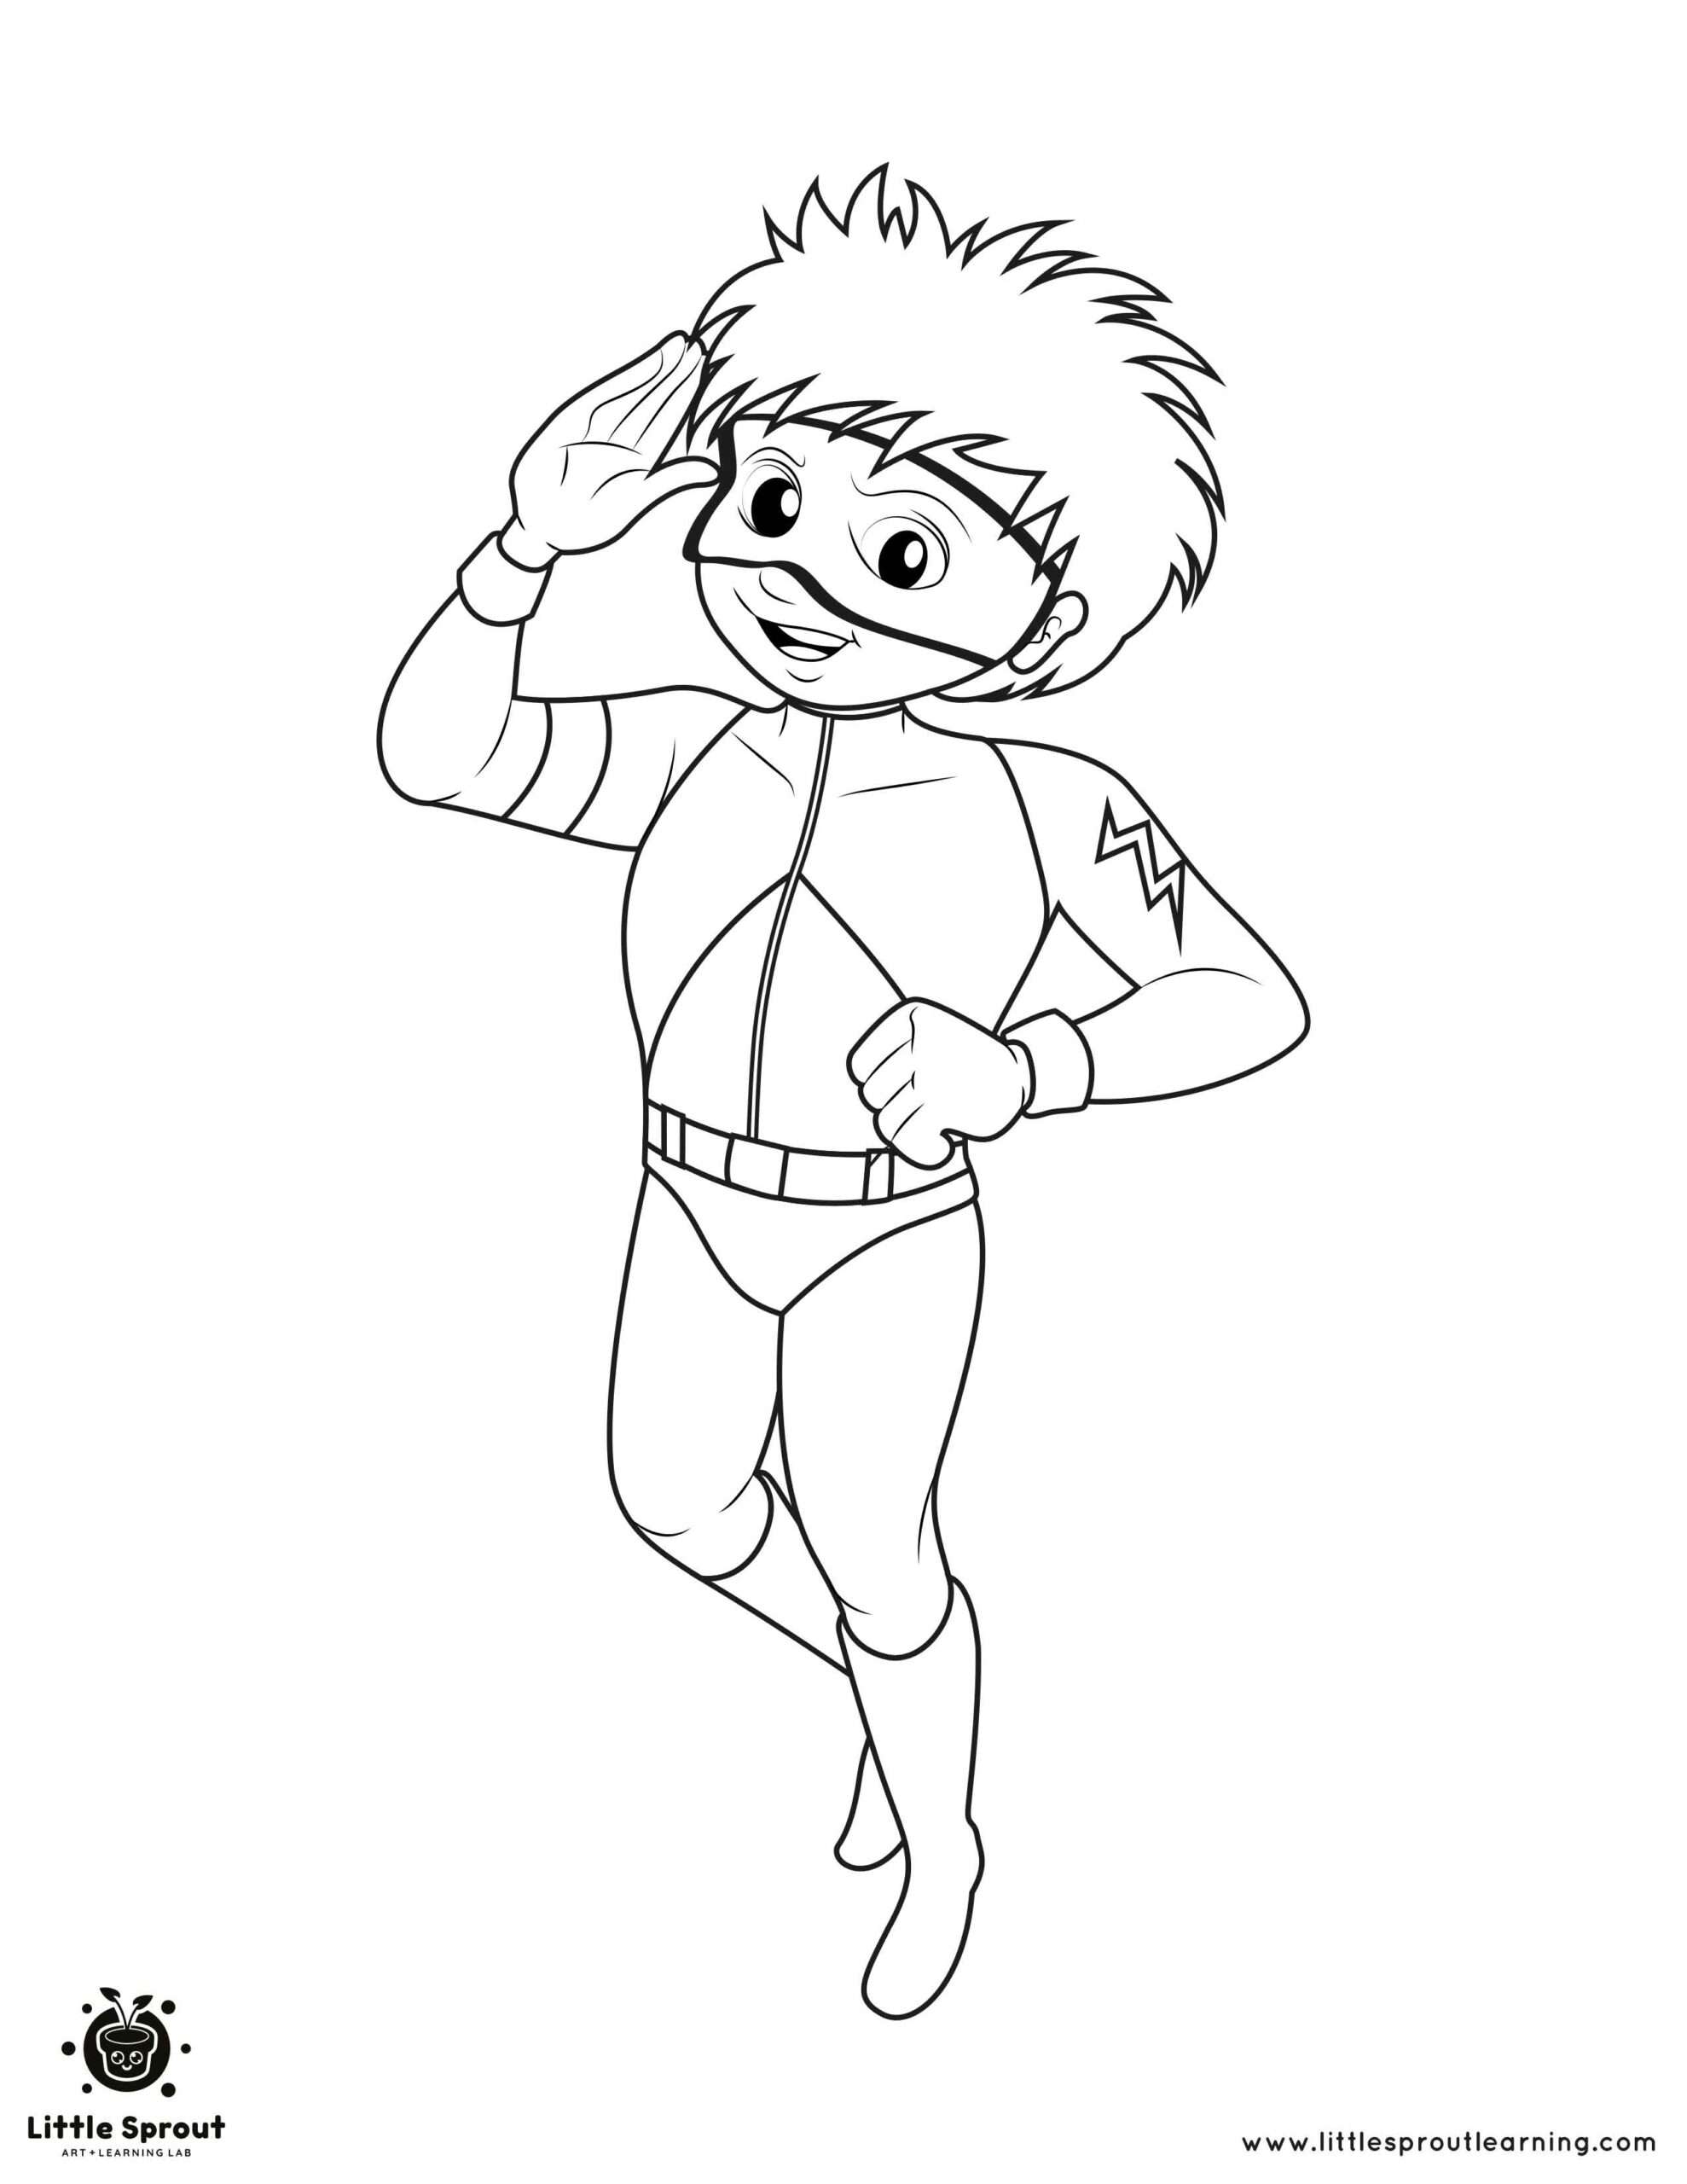 Best superhero coloring pages little sprout art